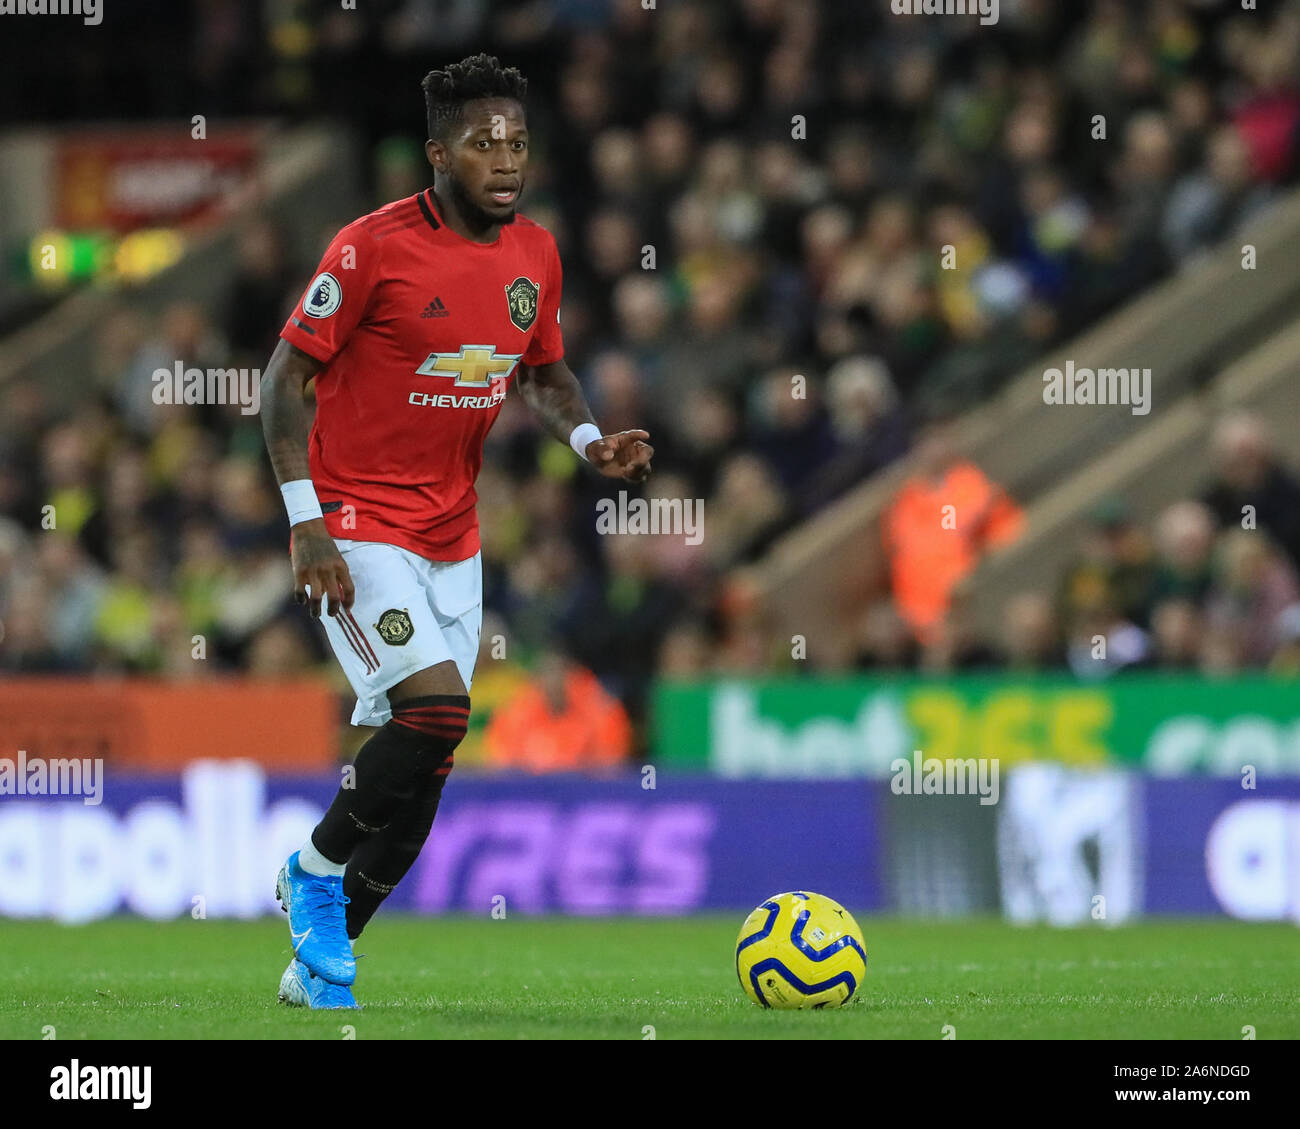 27th October 2019, Carrow Road, Norwich, England; Premier League, Norwich City v Manchester United : Fred (17) of Manchester United in action during the game  Credit: Mark Cosgrove/News Images Stock Photo